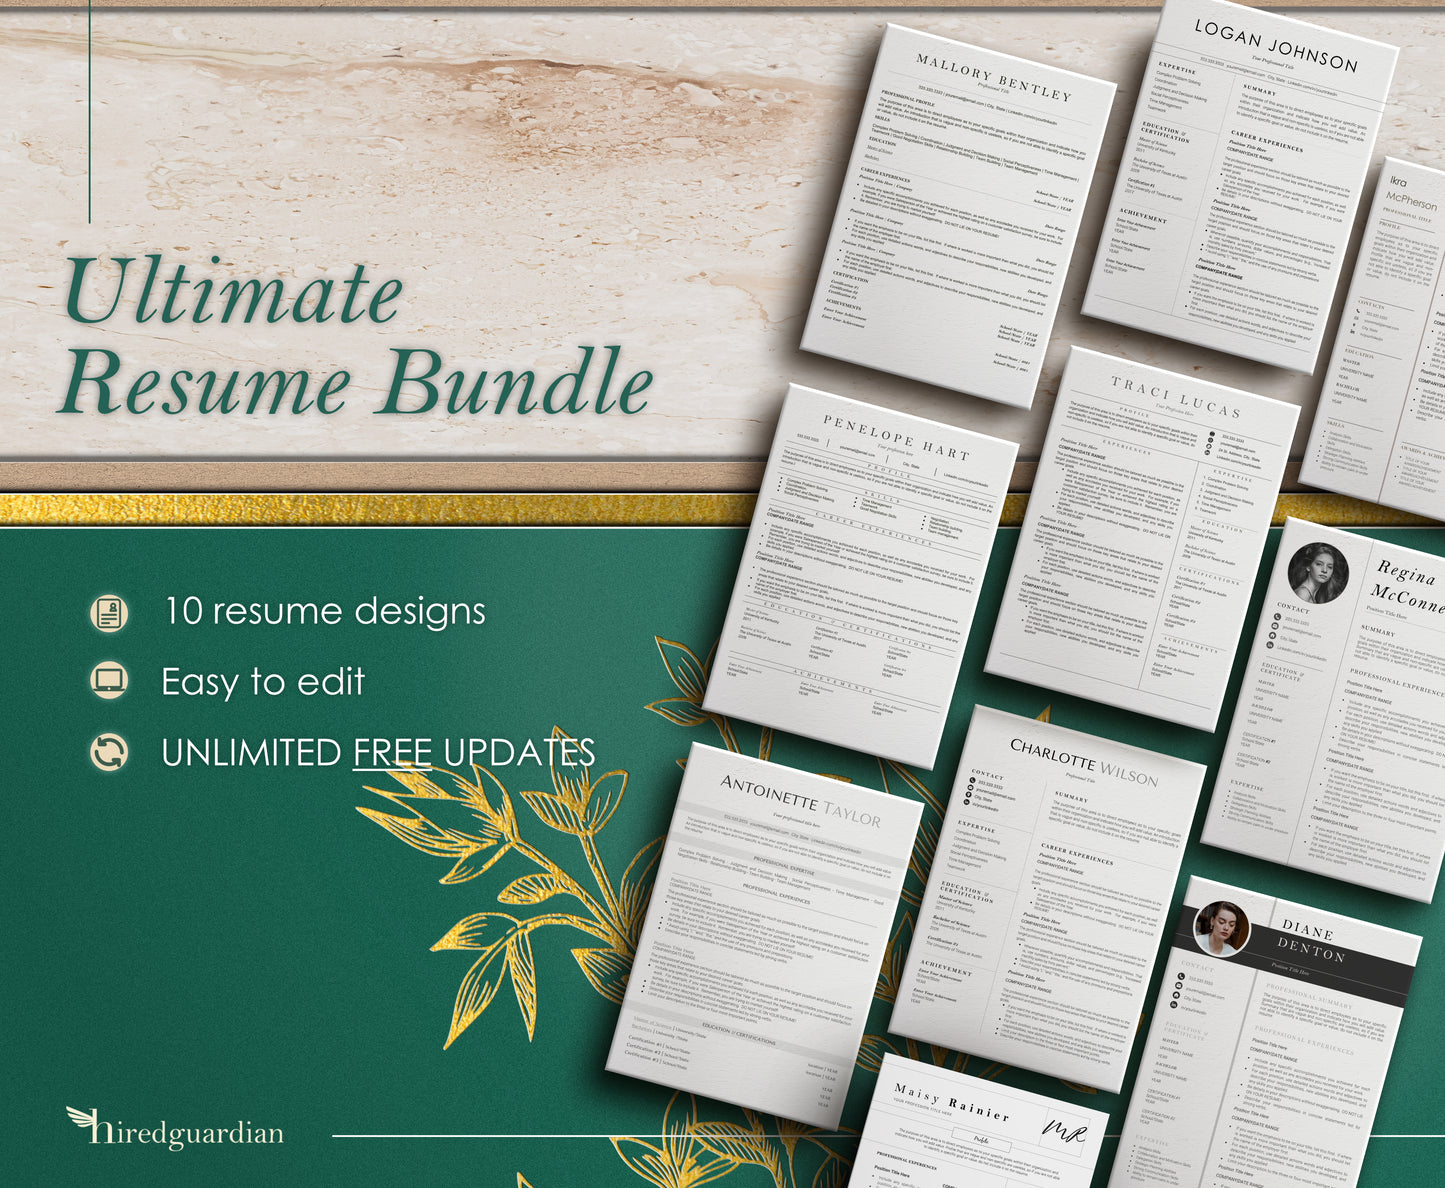 ATS-Friendly Resume Template - Penelope - Hired Guardian